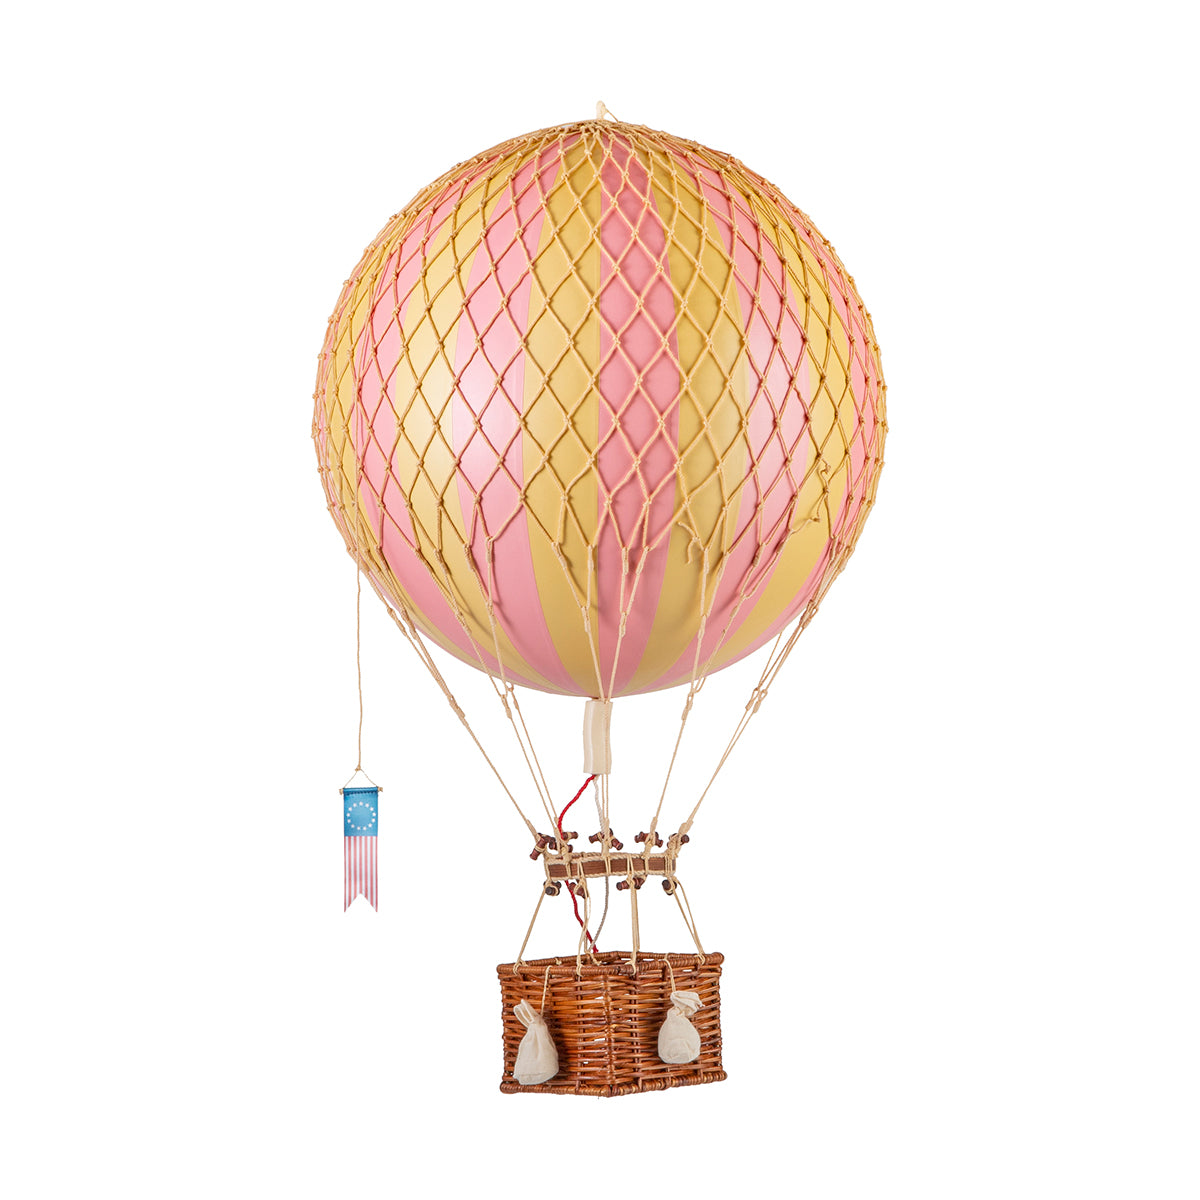 A unique Wonderen Medium Hot Air Balloon - Royal Aero with a wicker basket, offering a pink and yellow color scheme that allows for new heights and a unique perspective.